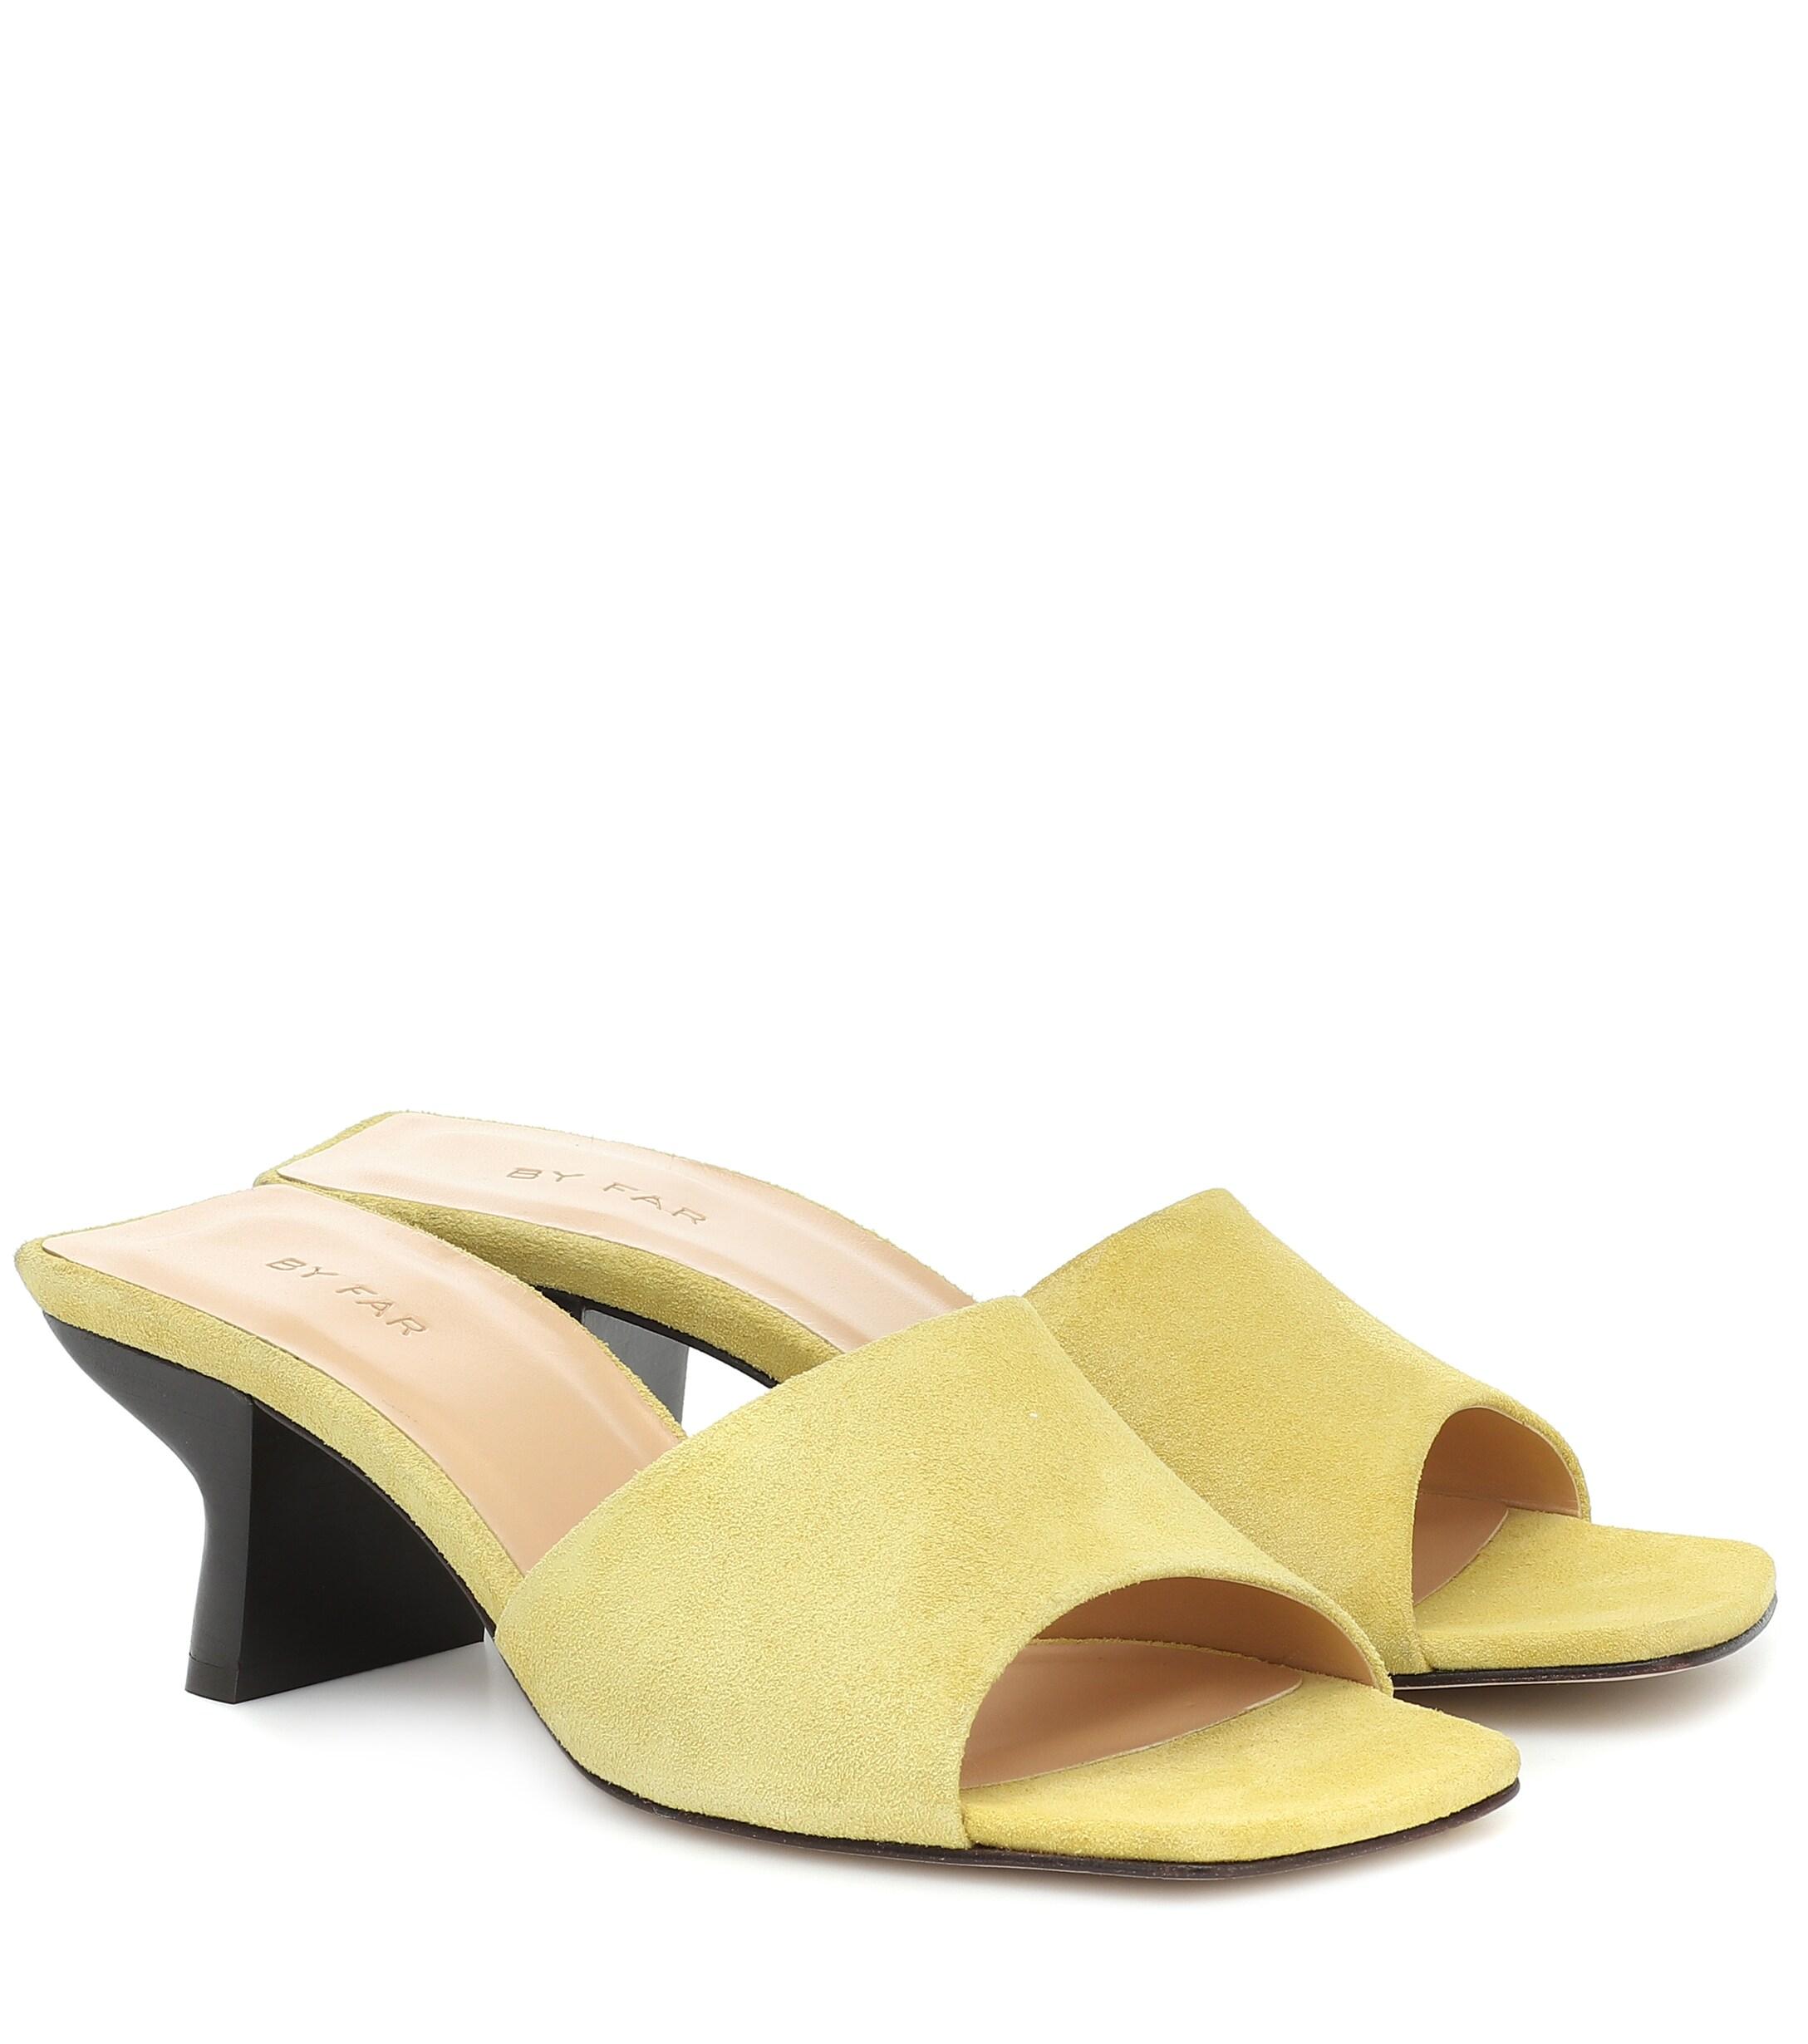 BY FAR Exclusive To Mytheresa – Suede Sandals in Yellow - Lyst